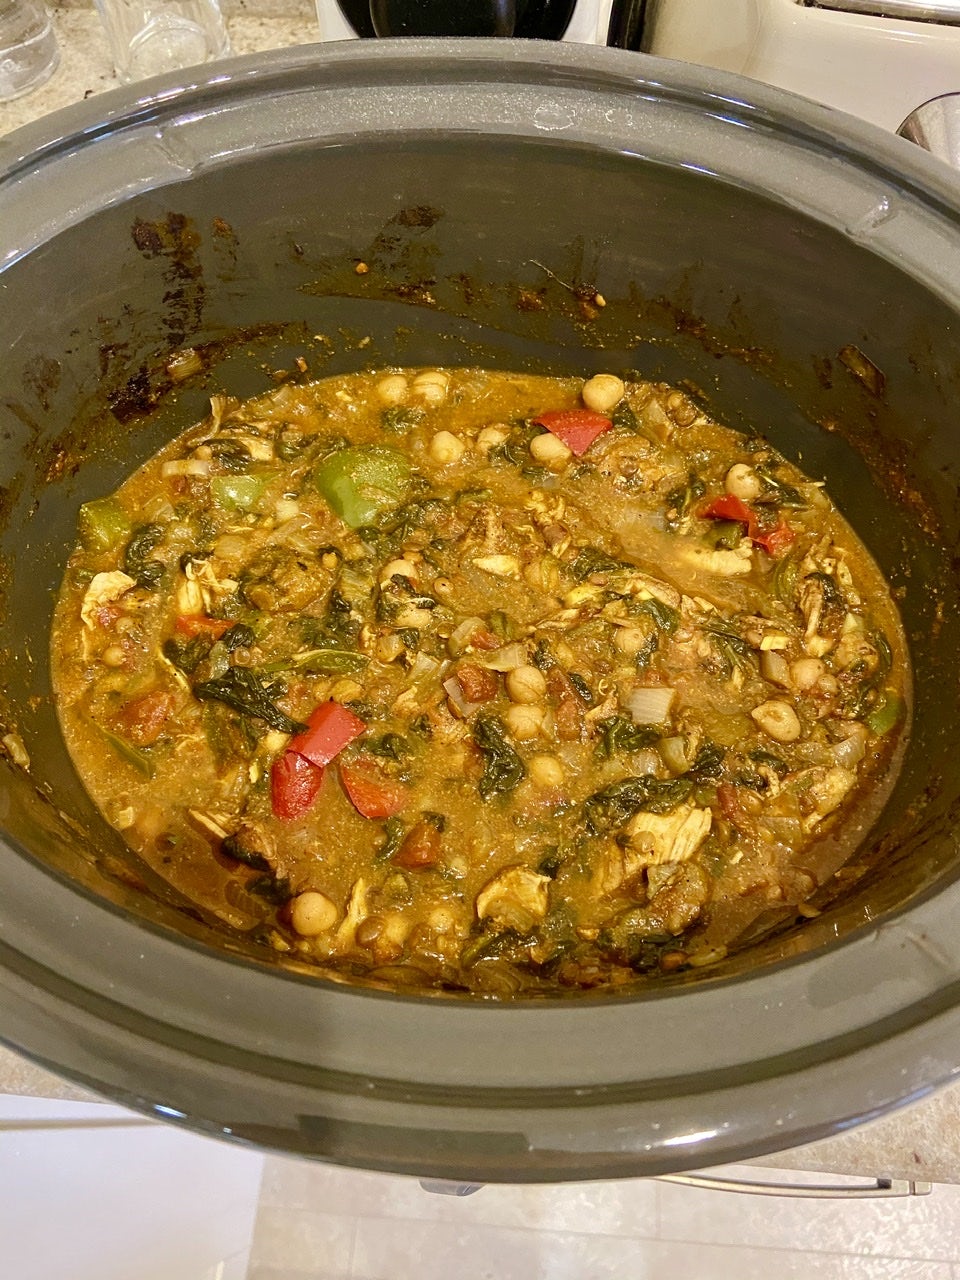 My curry in the slow cooker